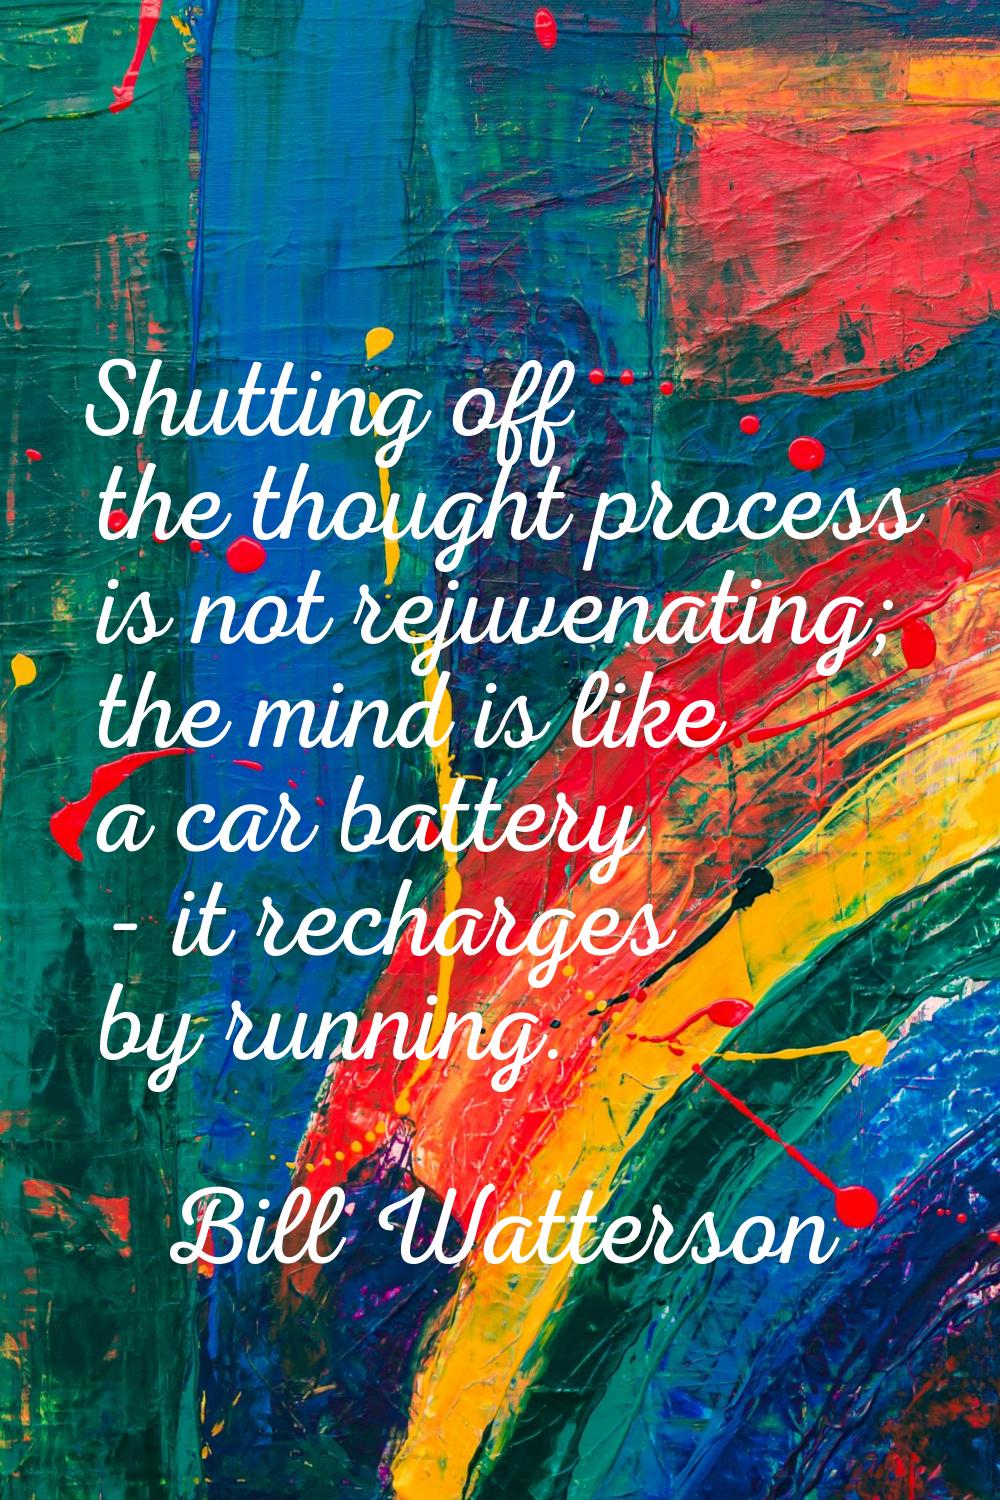 Shutting off the thought process is not rejuvenating; the mind is like a car battery - it recharges